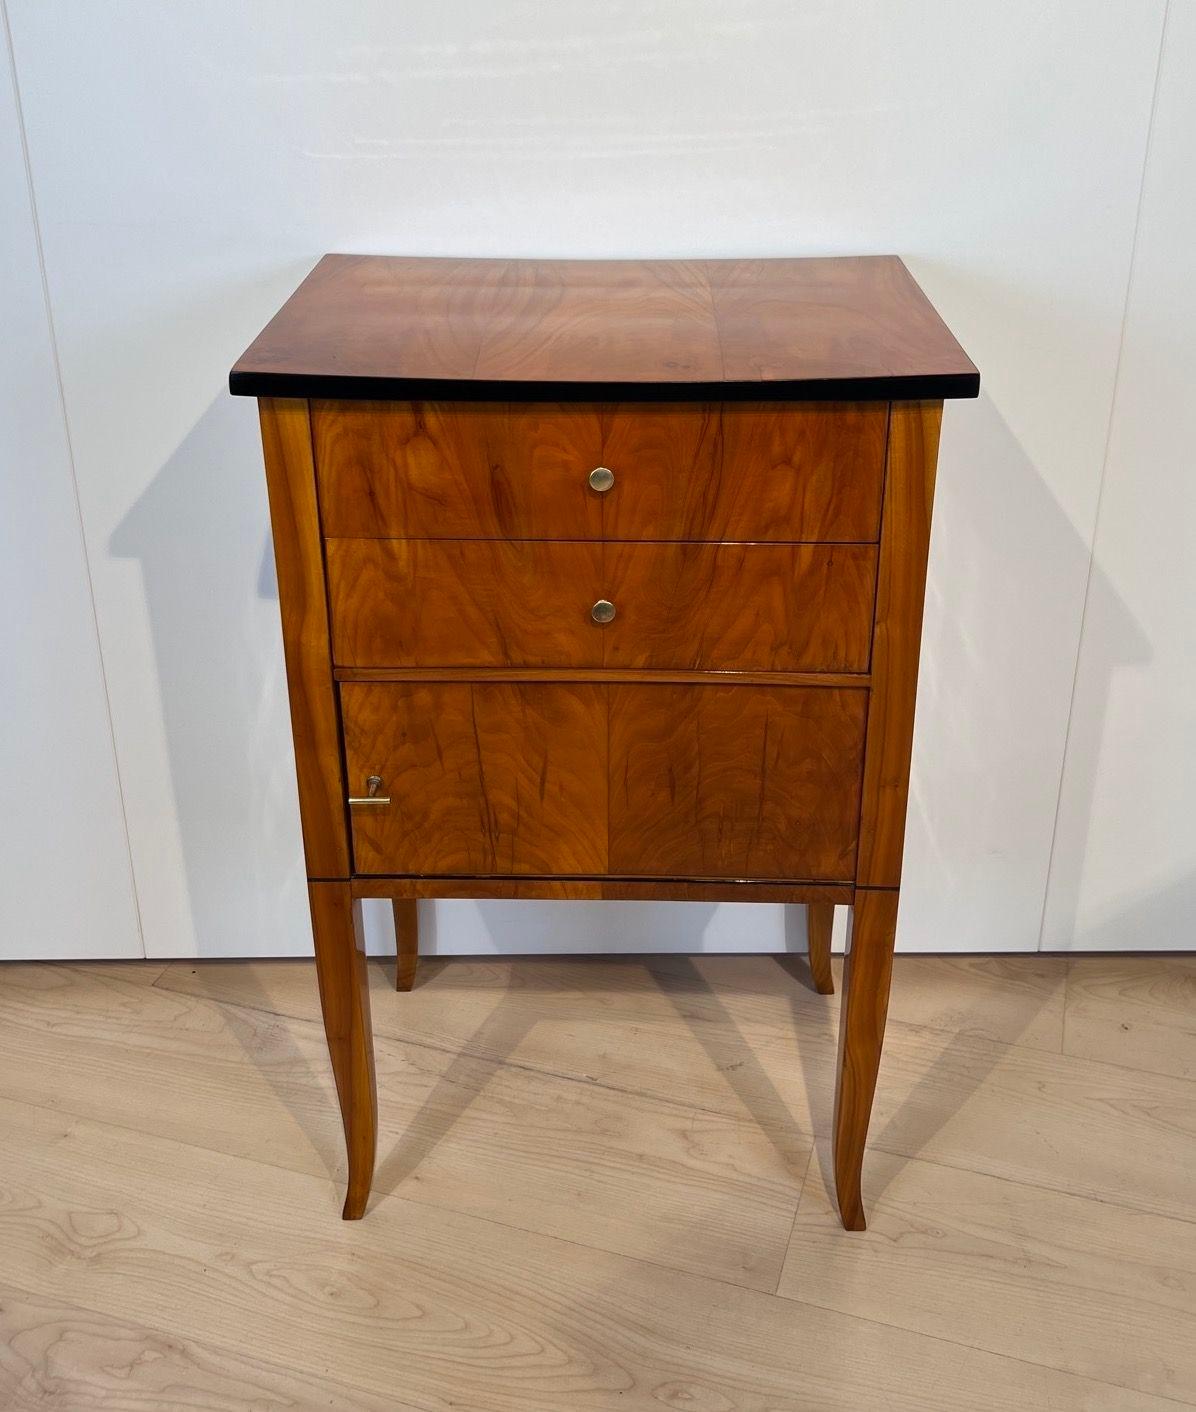 Biedermeier nightstand or small half cabinet from South Germany around 1825.
Cherry veneered and solid. Restored and hand polished with shellac.
2 drawers, 1 door. Brass buttons. Ebony intarsia ribbon and ebonized edges.
Dimensions:
* H 82 cm x W 52